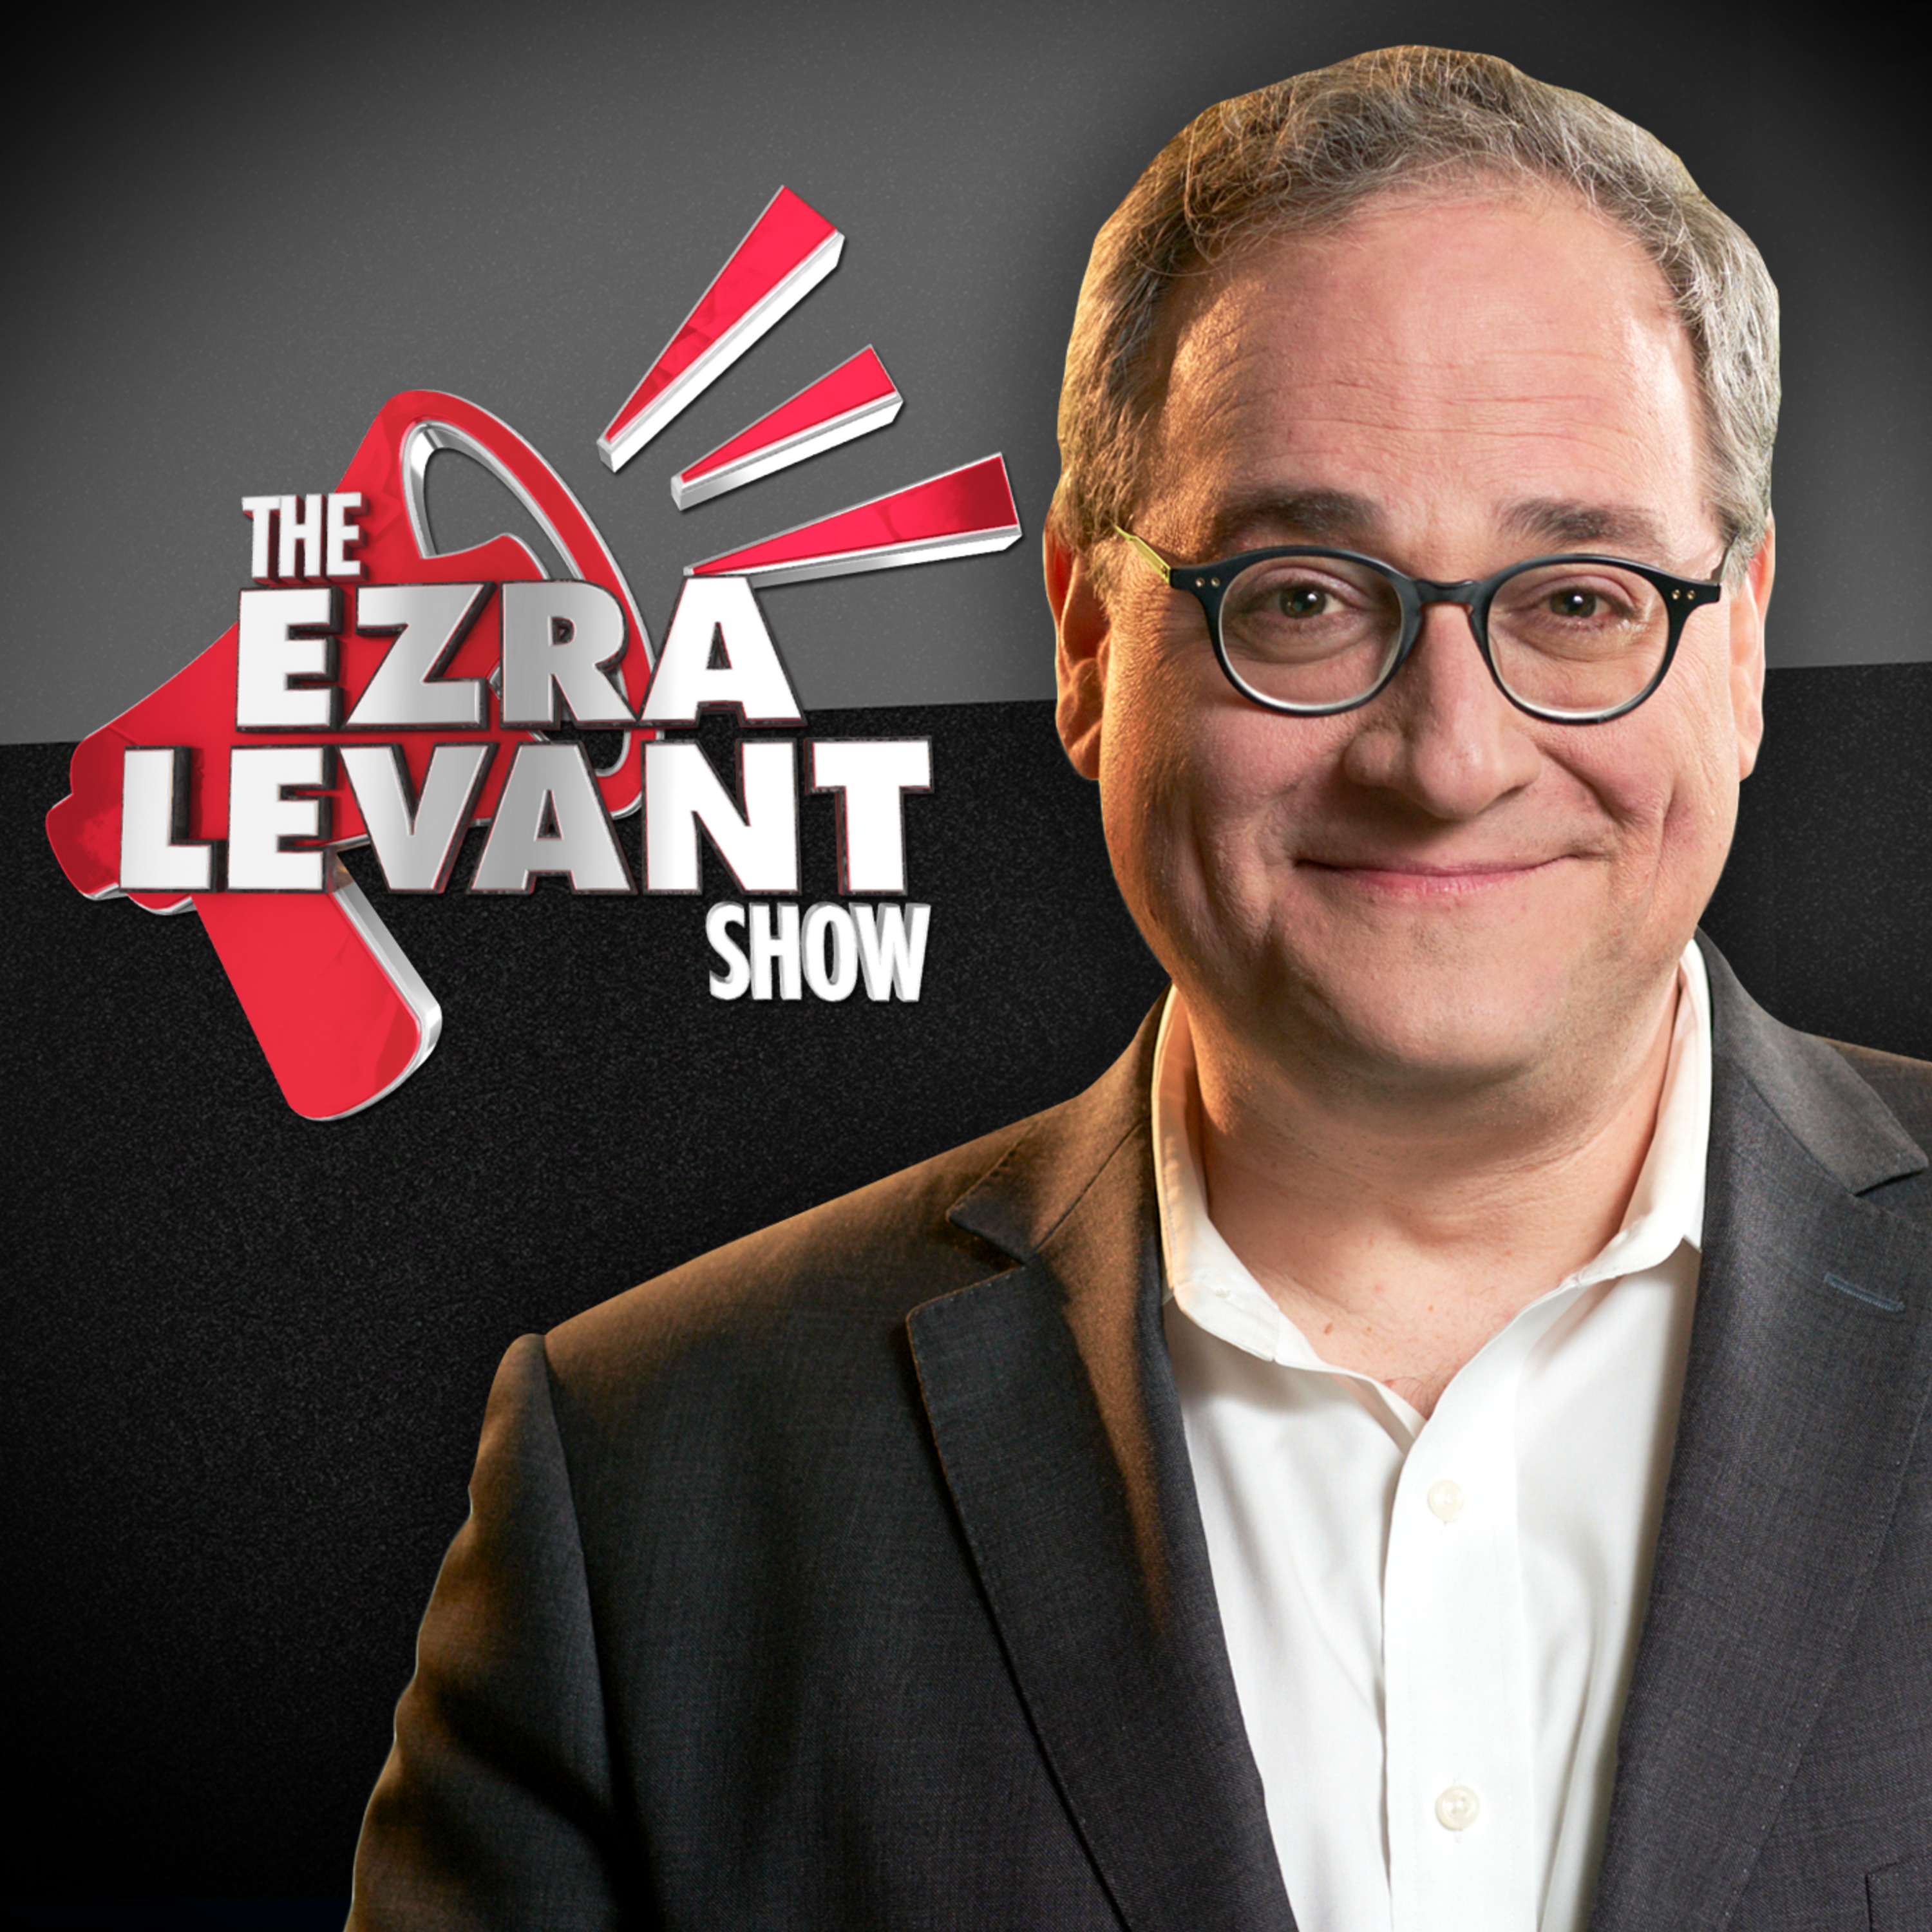 EZRA LEVANT | What's bugging me, you say? Insects on the dinner plate